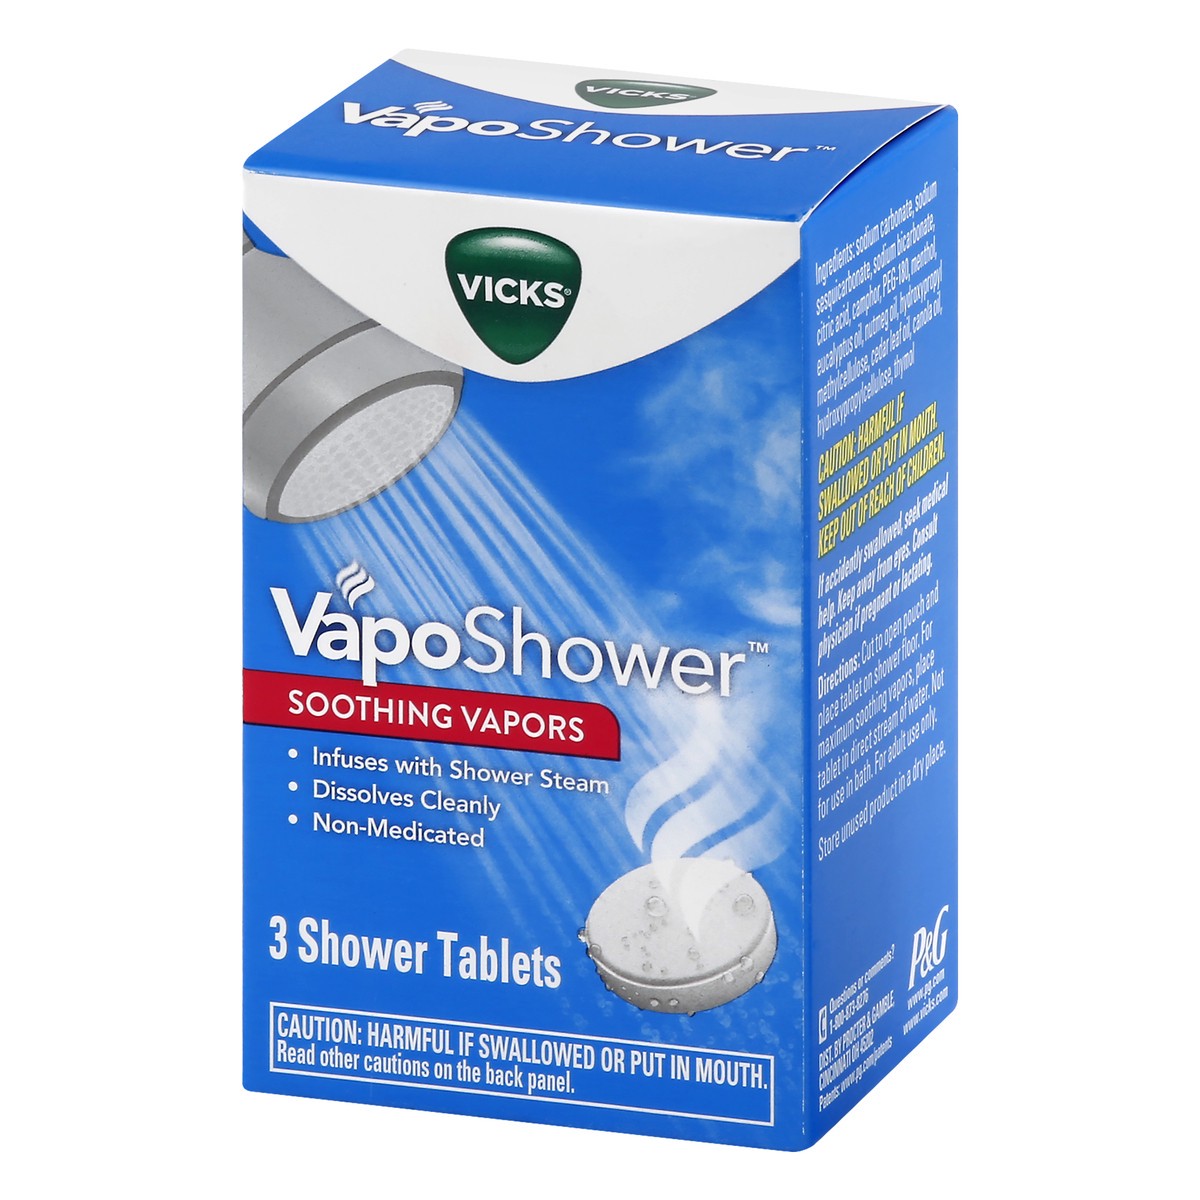 slide 4 of 9, Vicks VapoShower, Shower Steamers, Shower Tablets, Soothing Non-Medicated Vicks Vapors, Infuses into Shower Steam, Dissolves Cleanly, Aromatherapy Shower Bomb, Eucalyptus & Menthol, 3ct, 3 ct